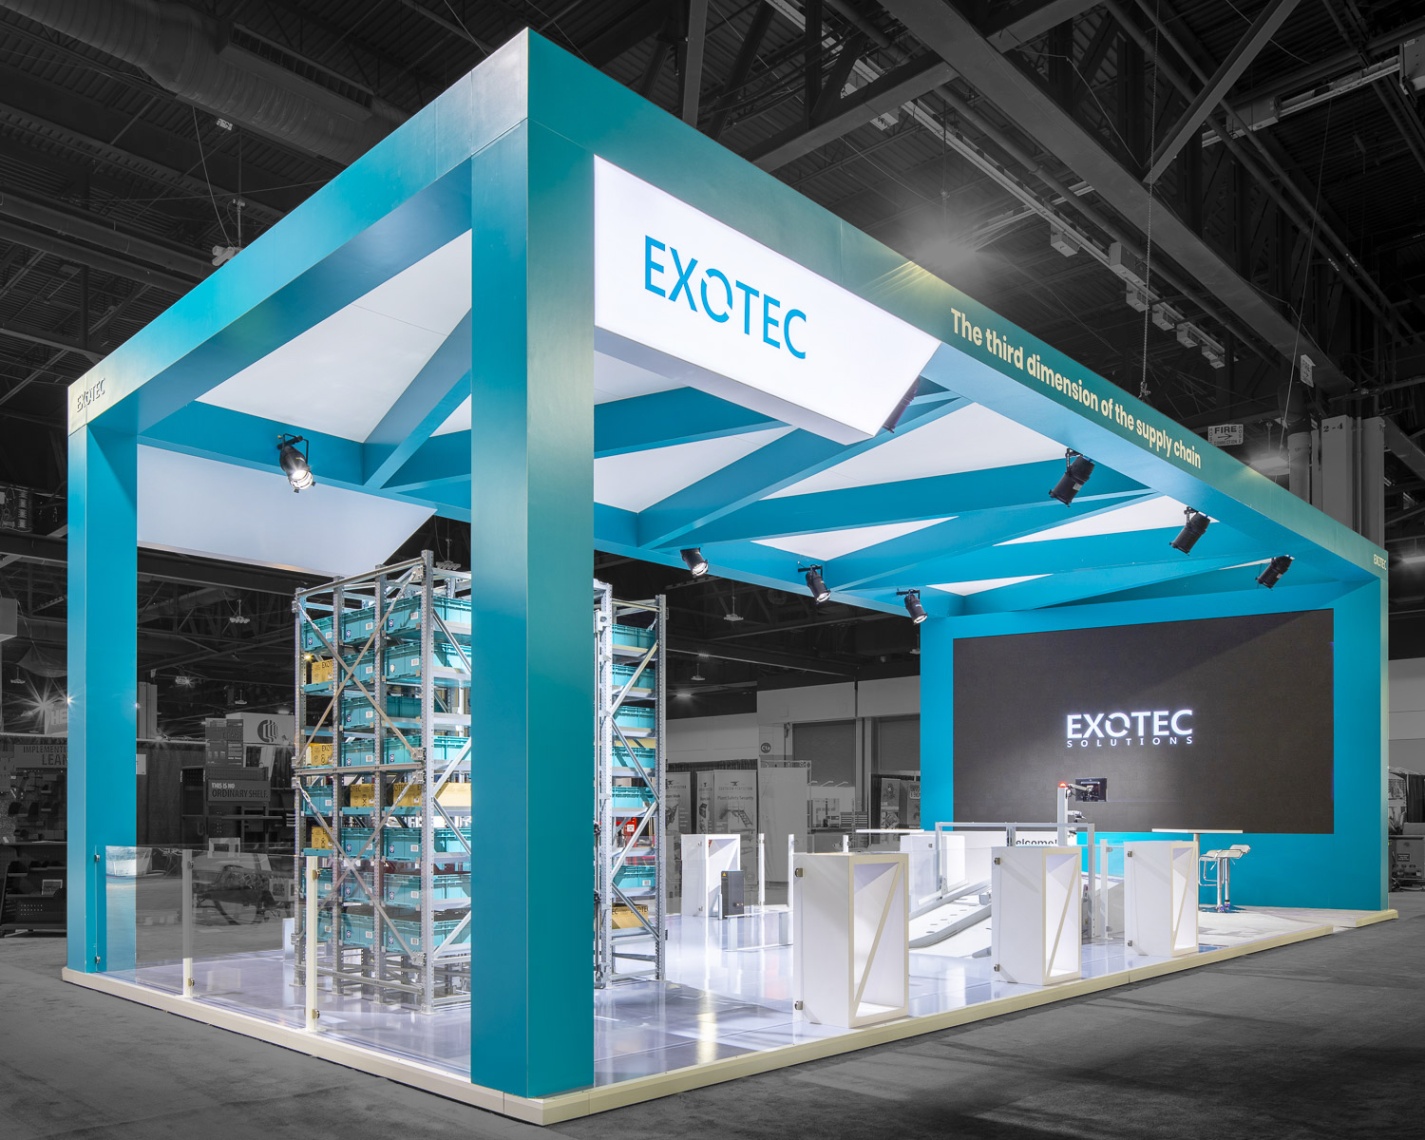 Stand Out At Your Next Event With An Eye-catching Booth Exhibition Design!